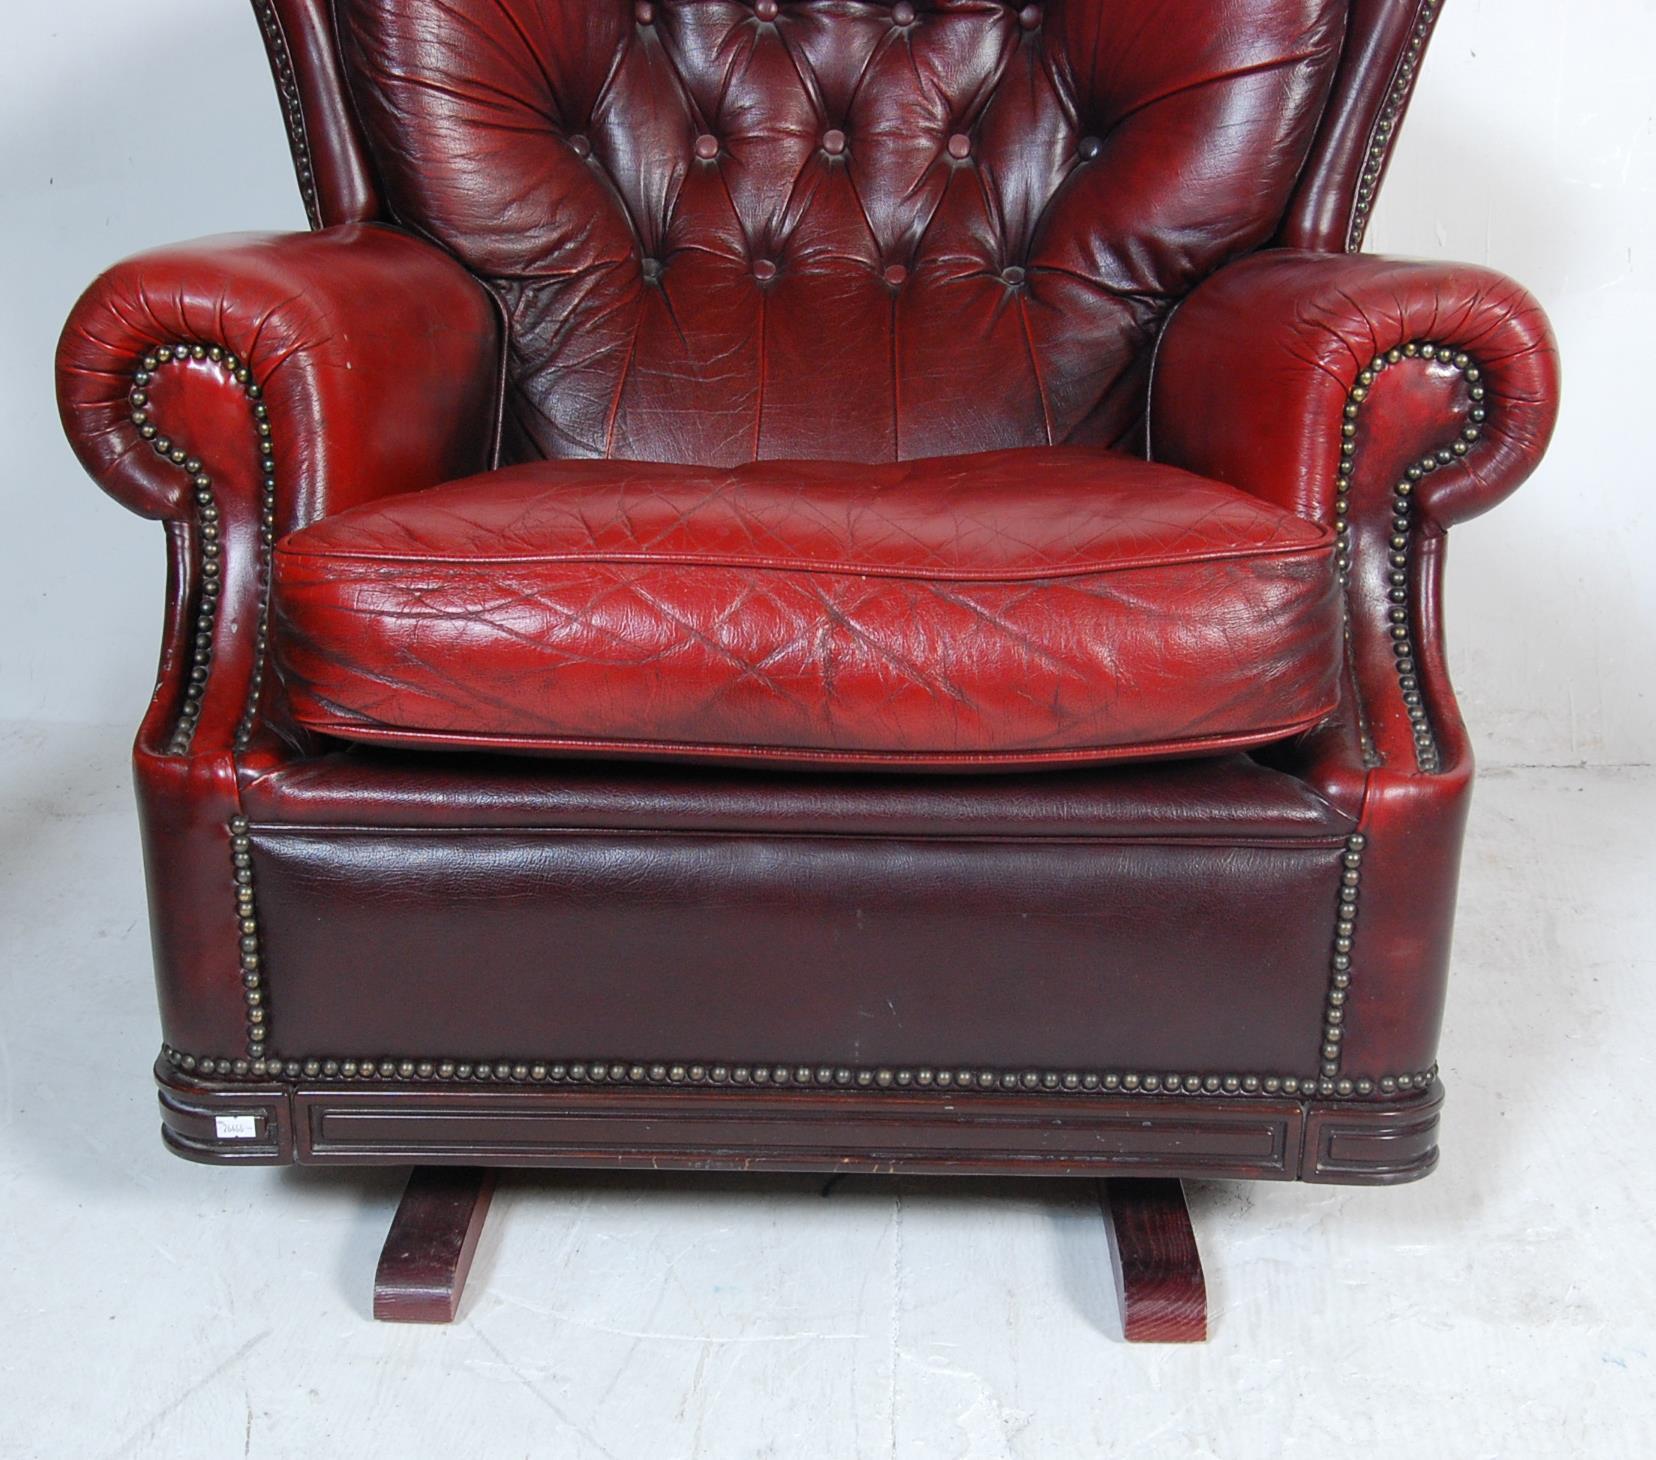 CHESTERFIELD OXBLOOD ARMCHAIR - Image 4 of 6